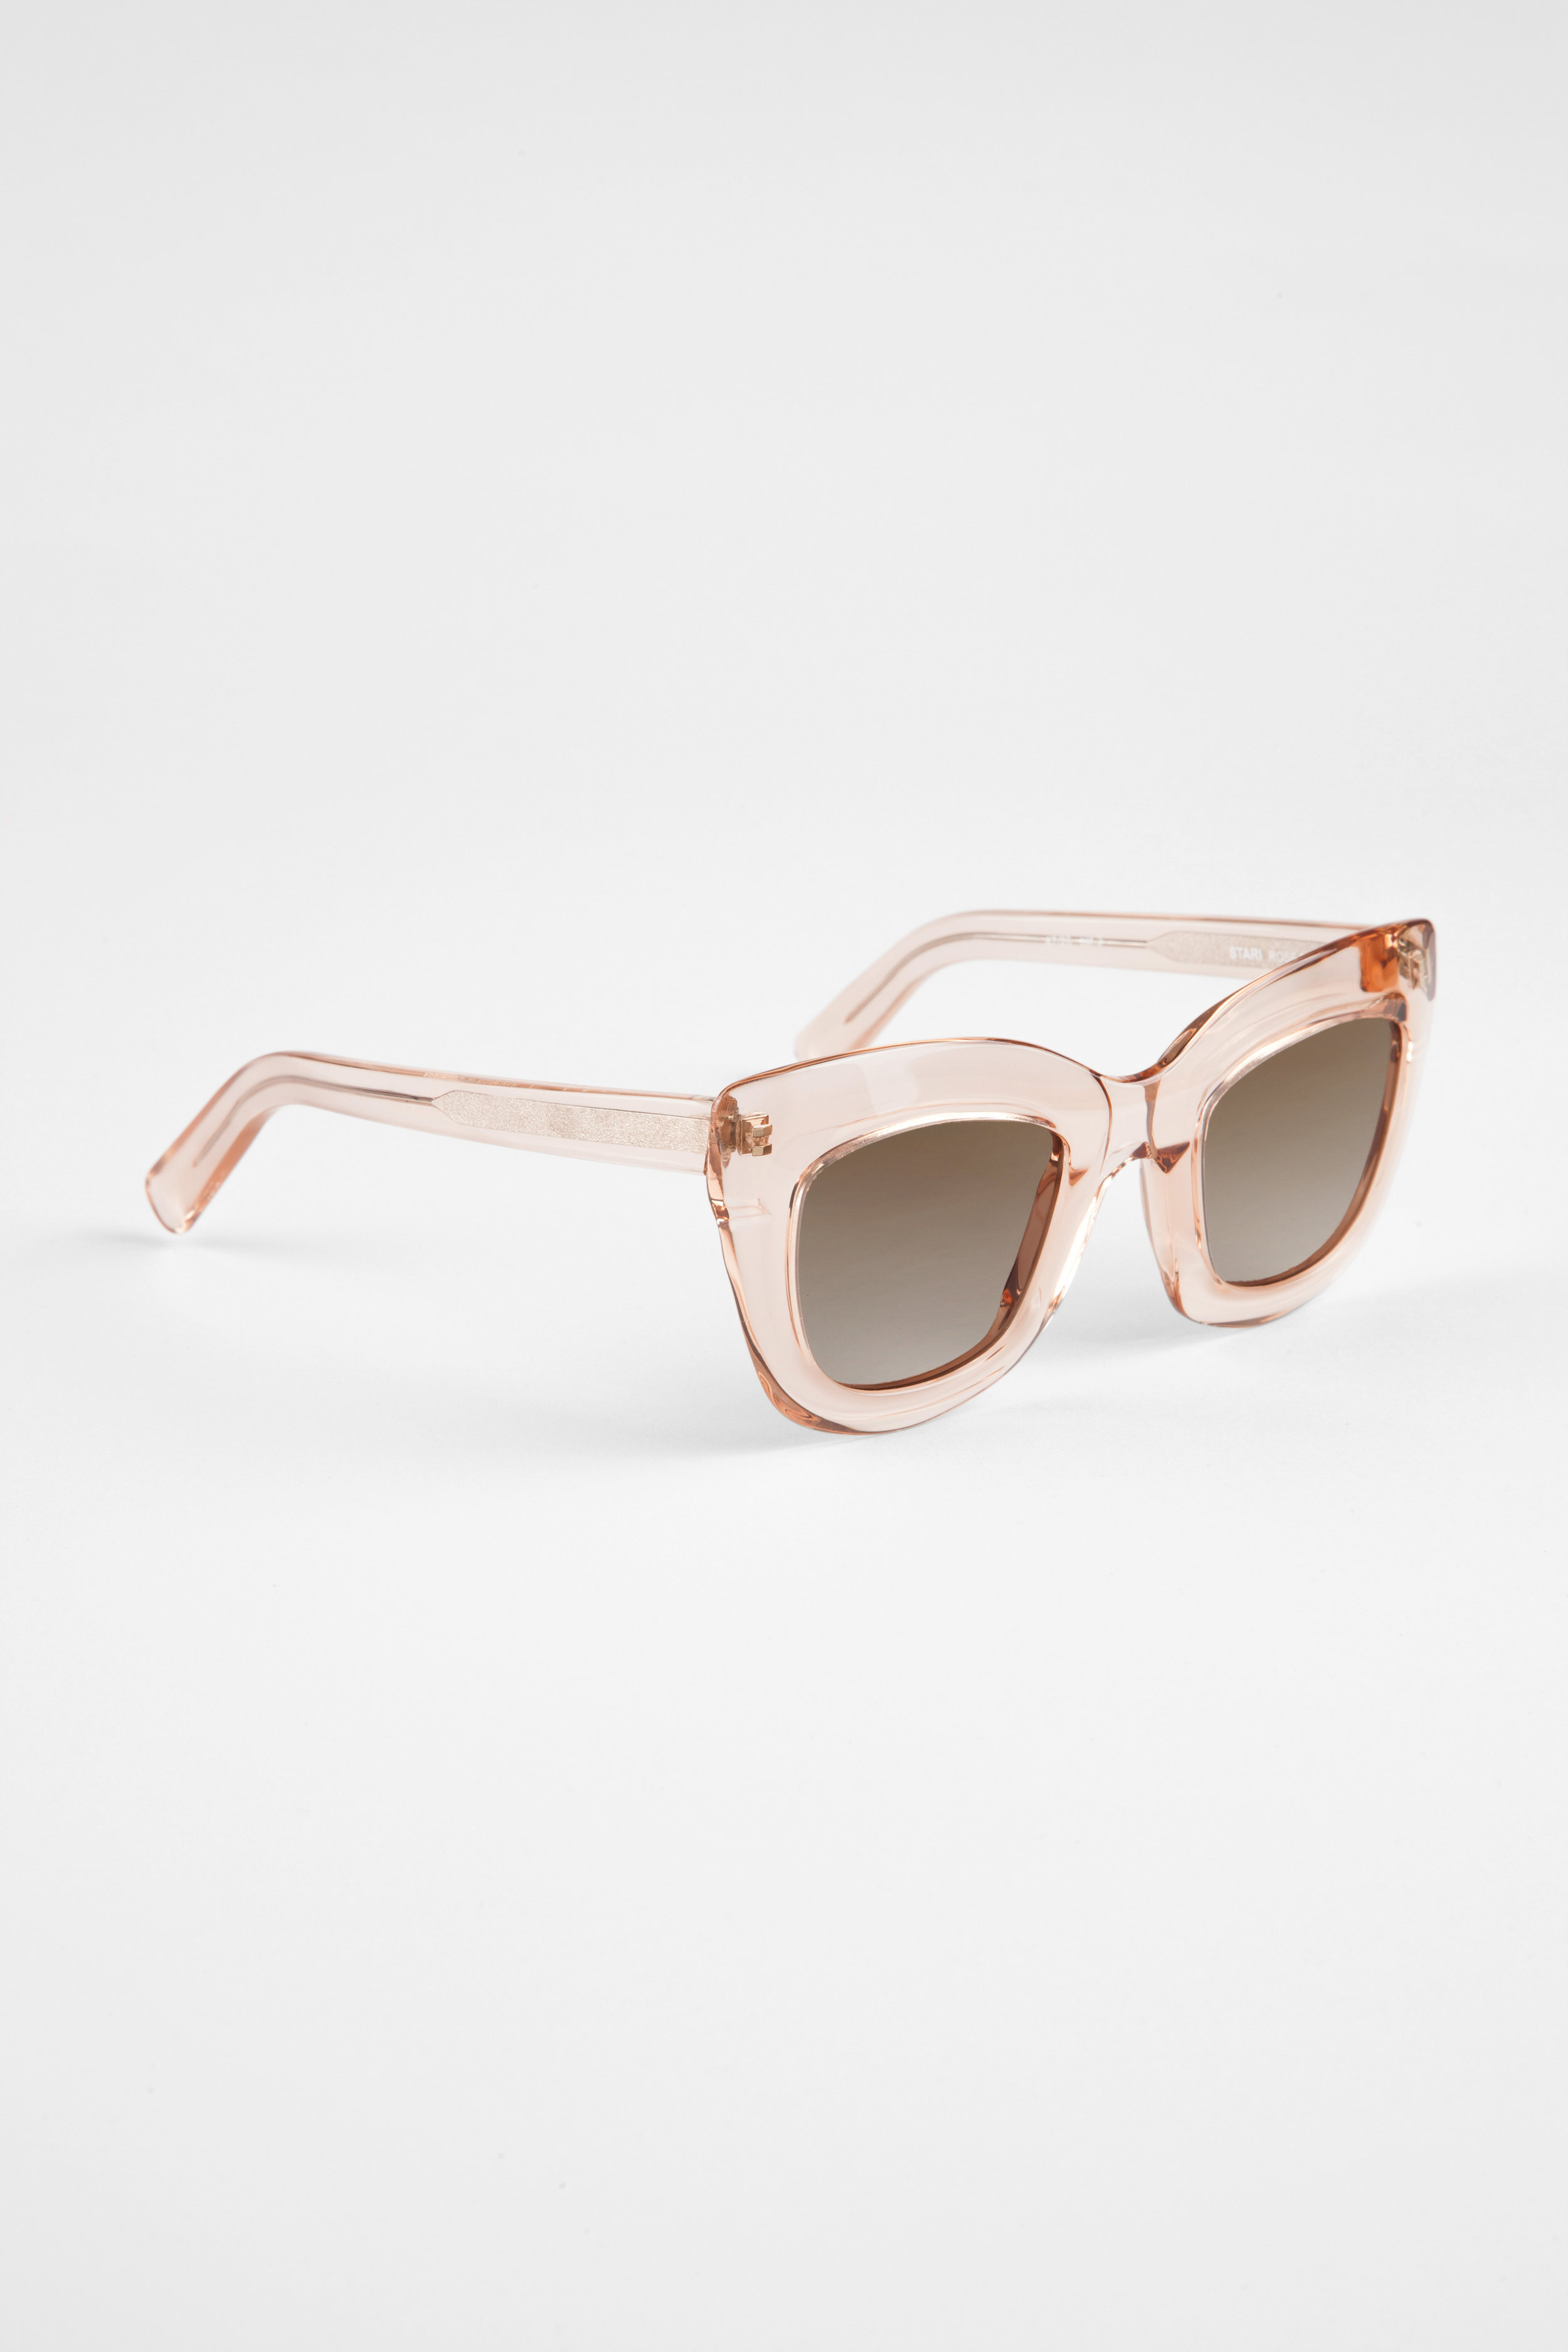 SHOP — Folc eyewear - Sculpted, Contemporary and Sustainable eyewear design